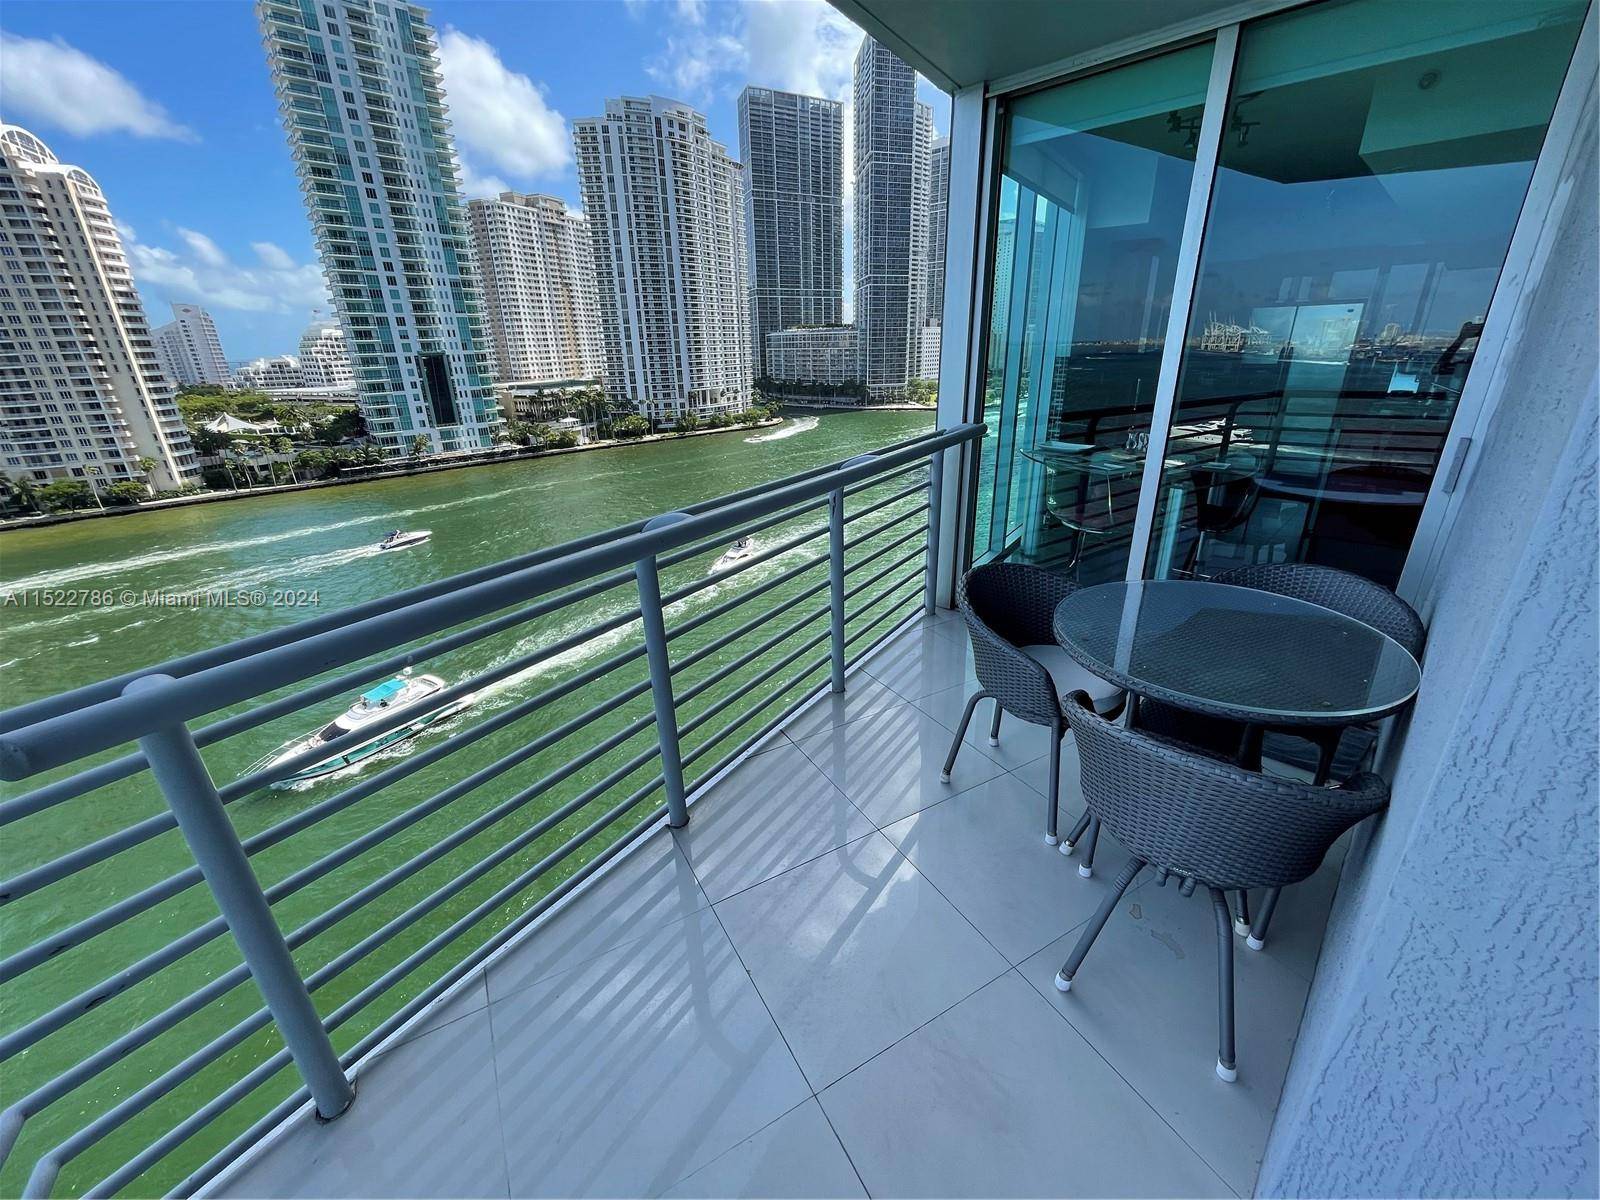 CORNER UNIT WITH PANORAMIC VIEWS, RARELY AVAILABLE AT ONE MIAMI 09 LINE.